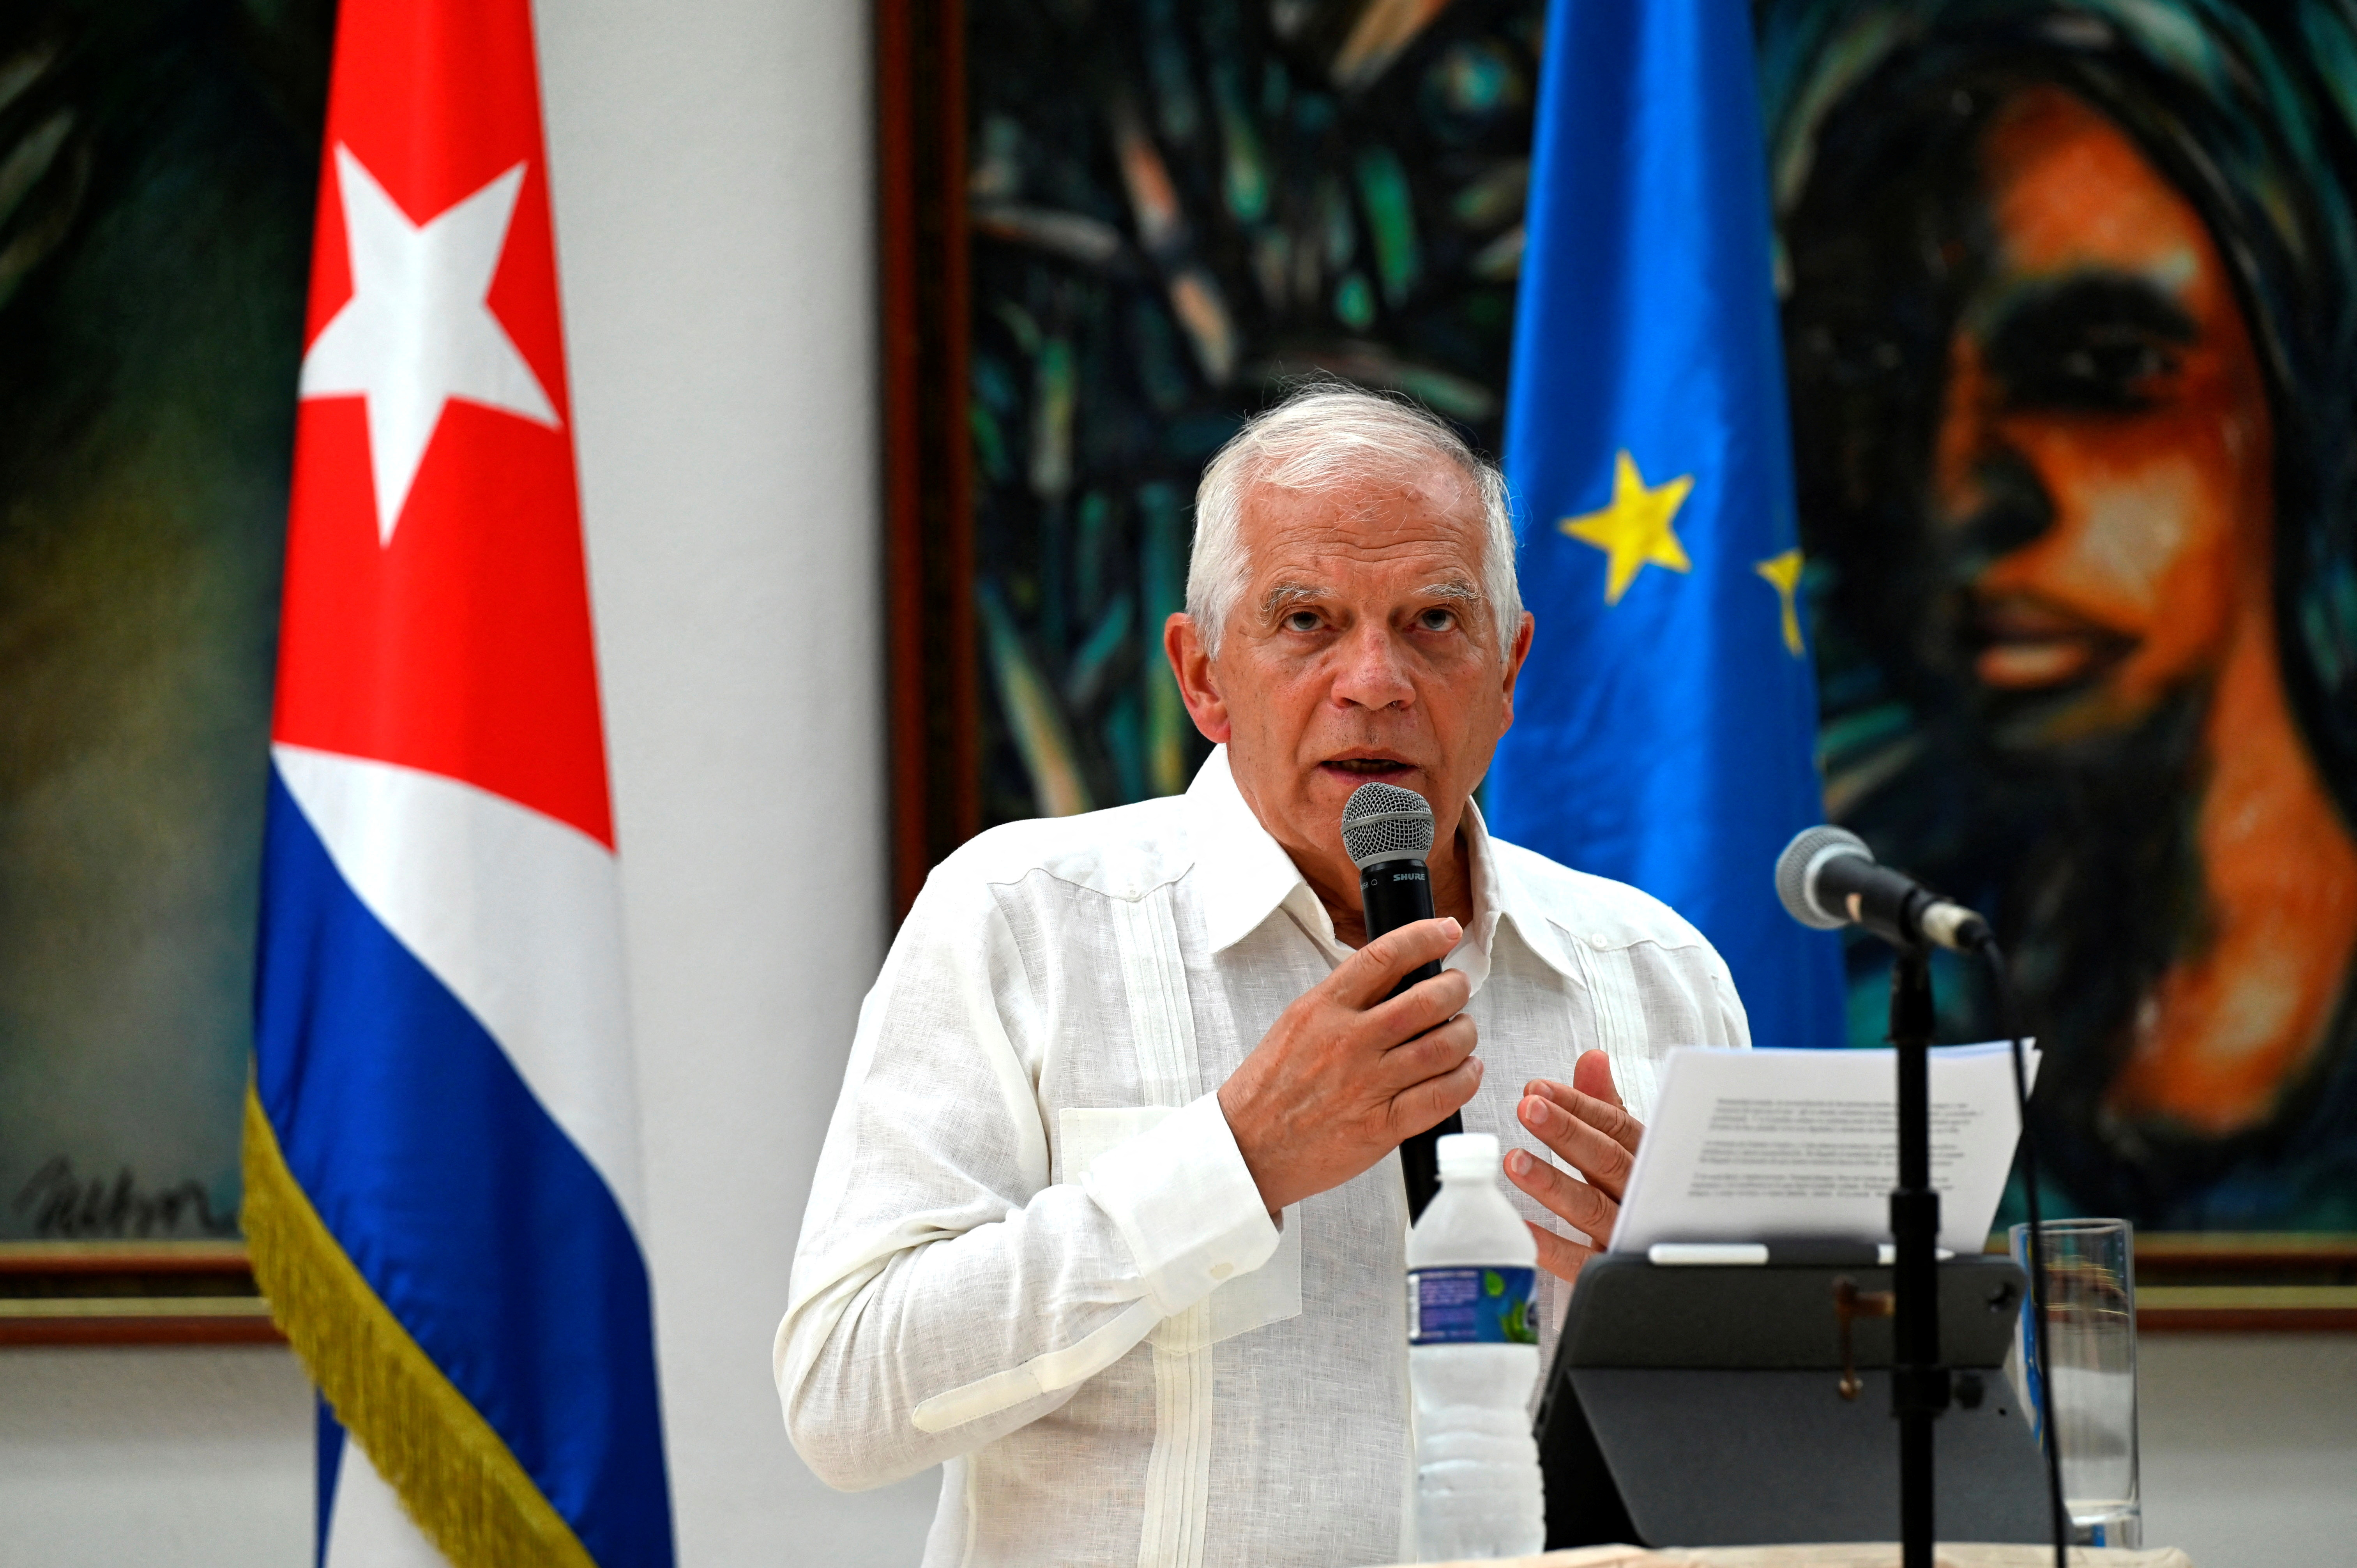 Borrell delivers a statement in Havana